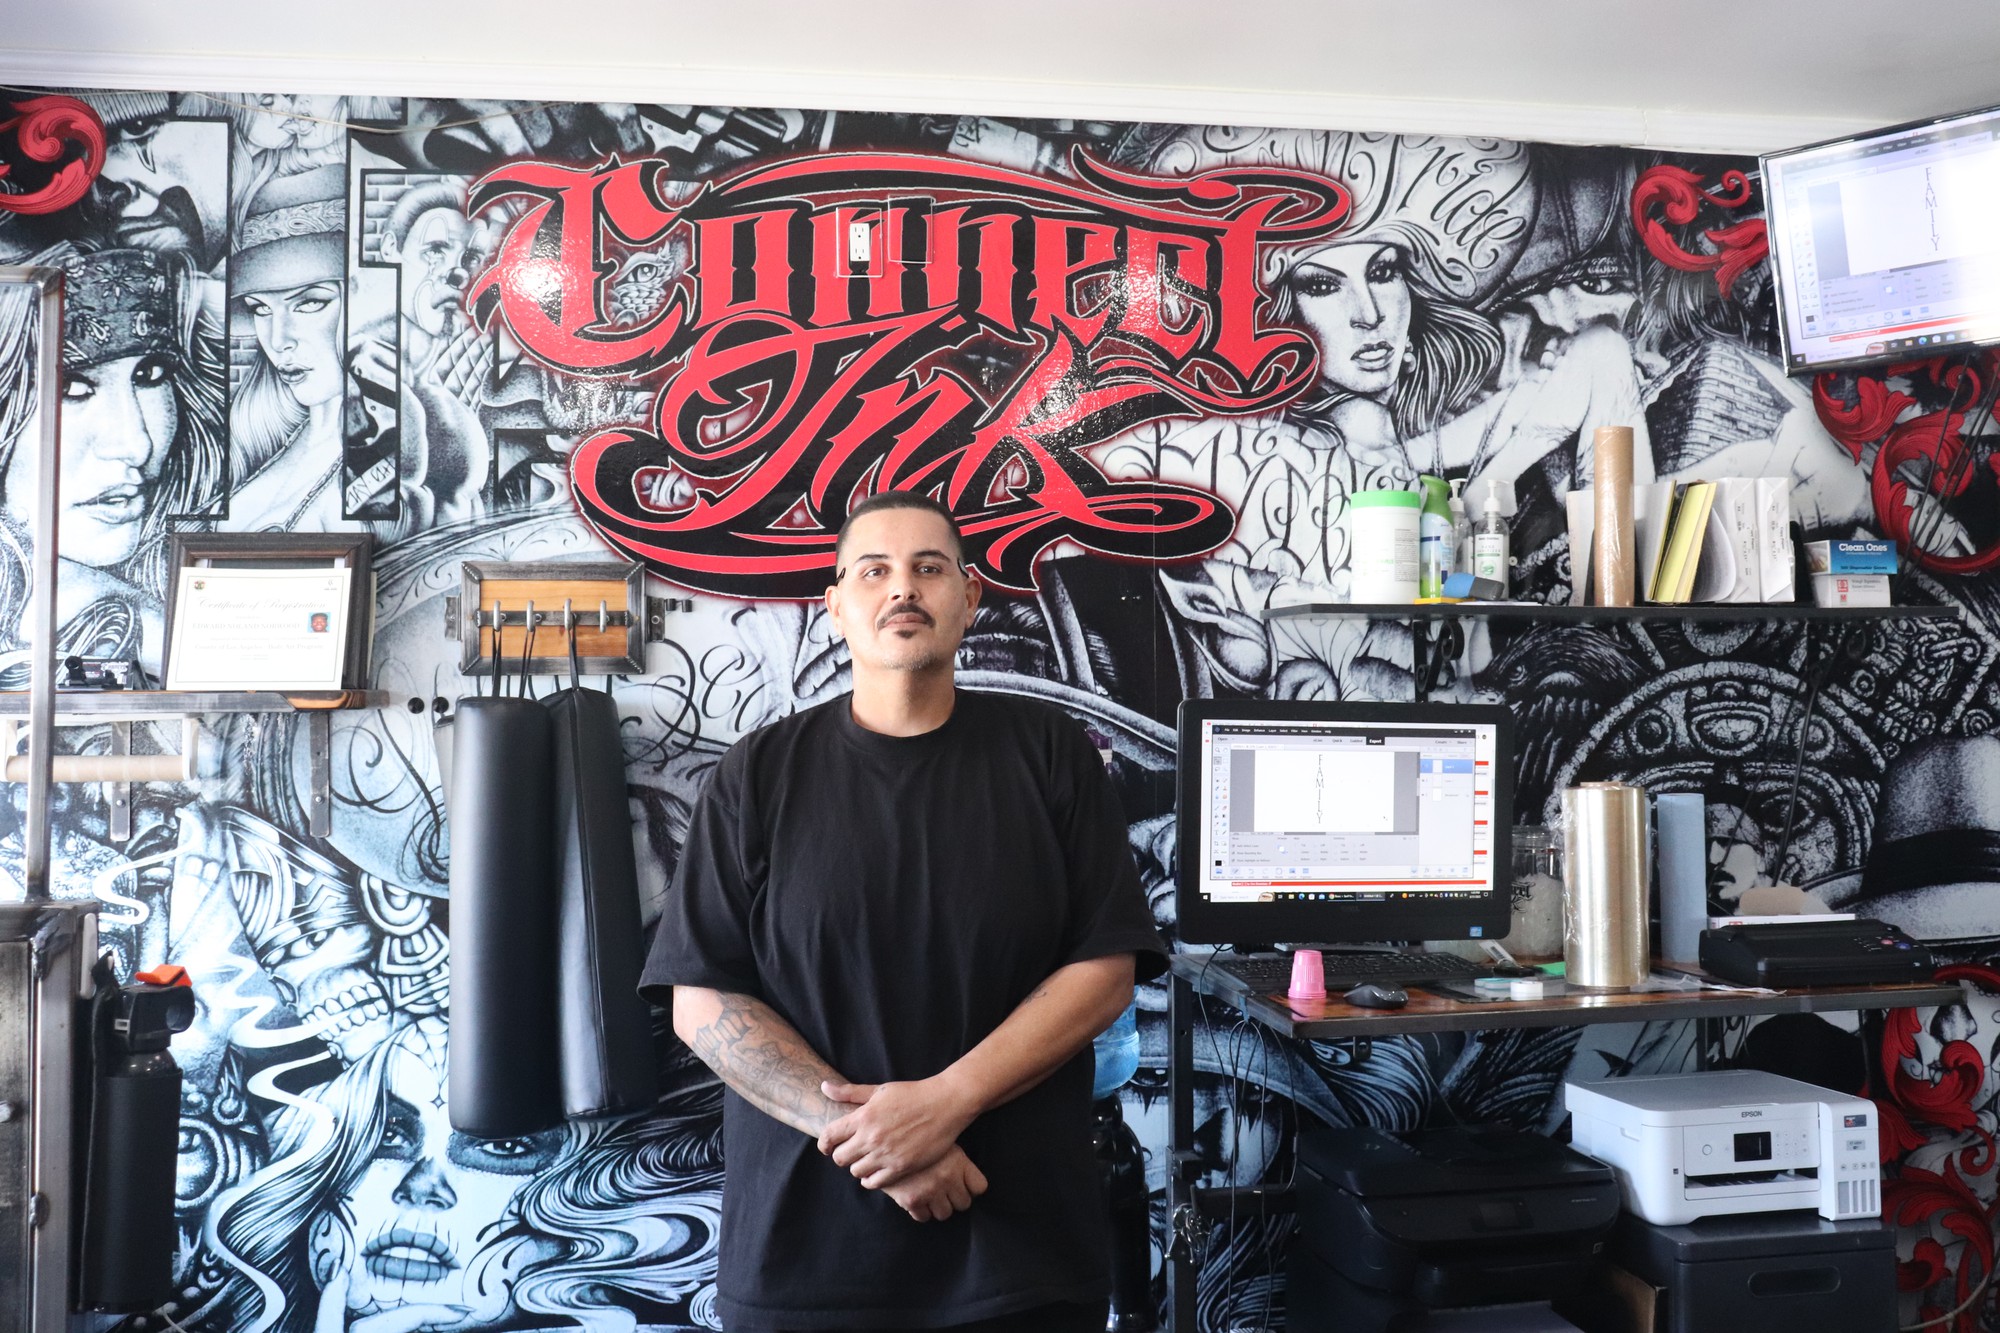 Simon Vasquez Jr. stands proudly in the shop he created.